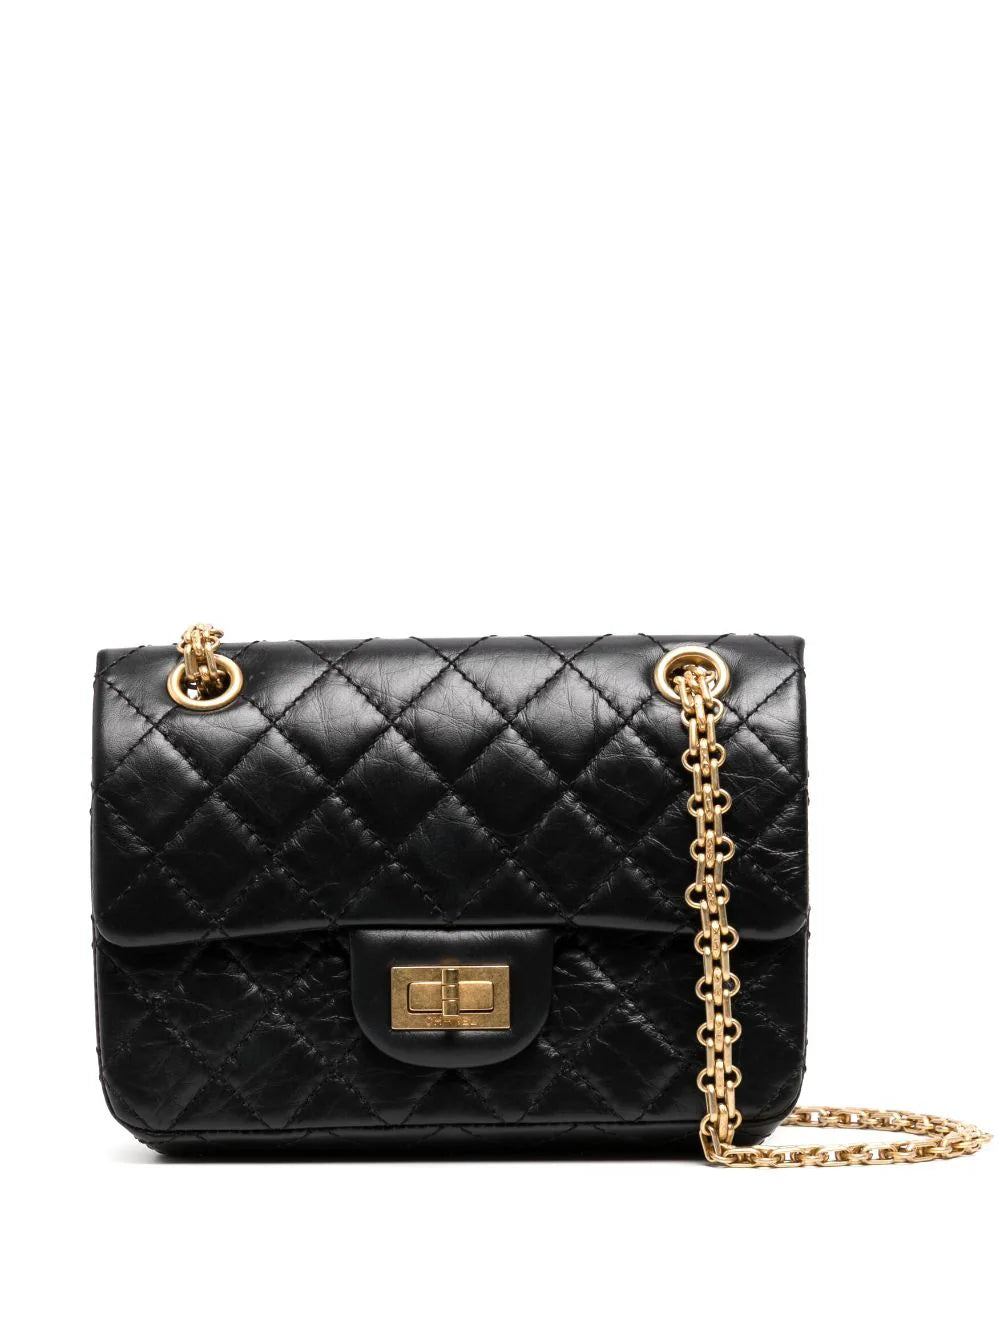 Chanel 2.55 - everything you need to know before buying the flap bag